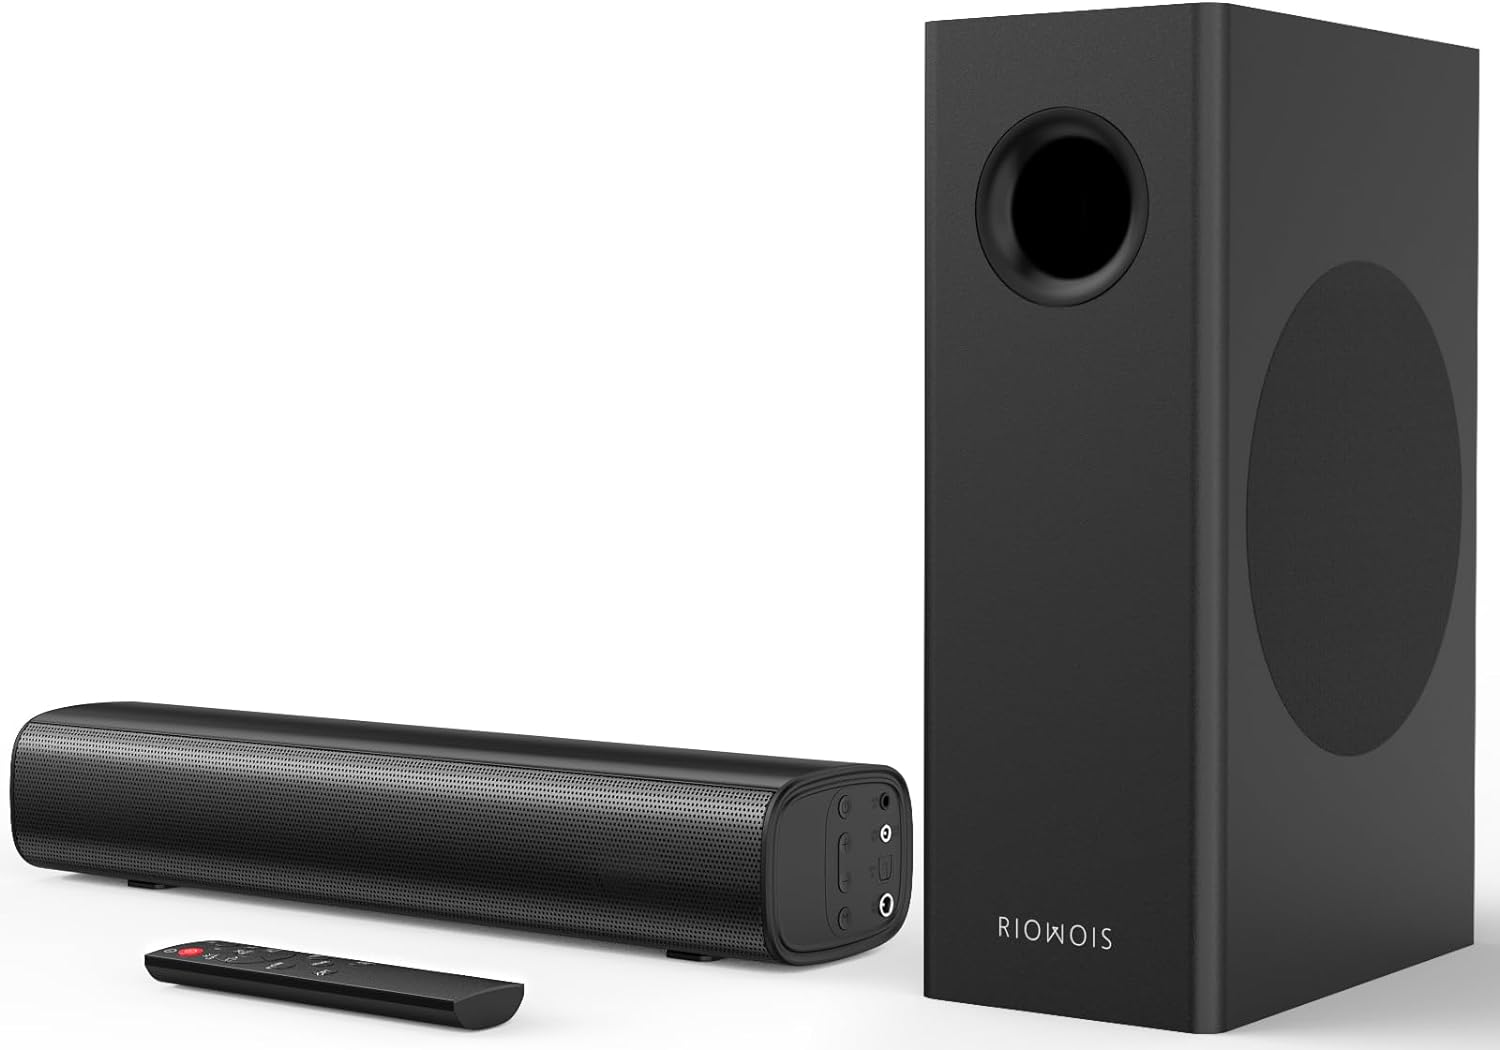 Riowois Sound Bars with Subwoofer Review